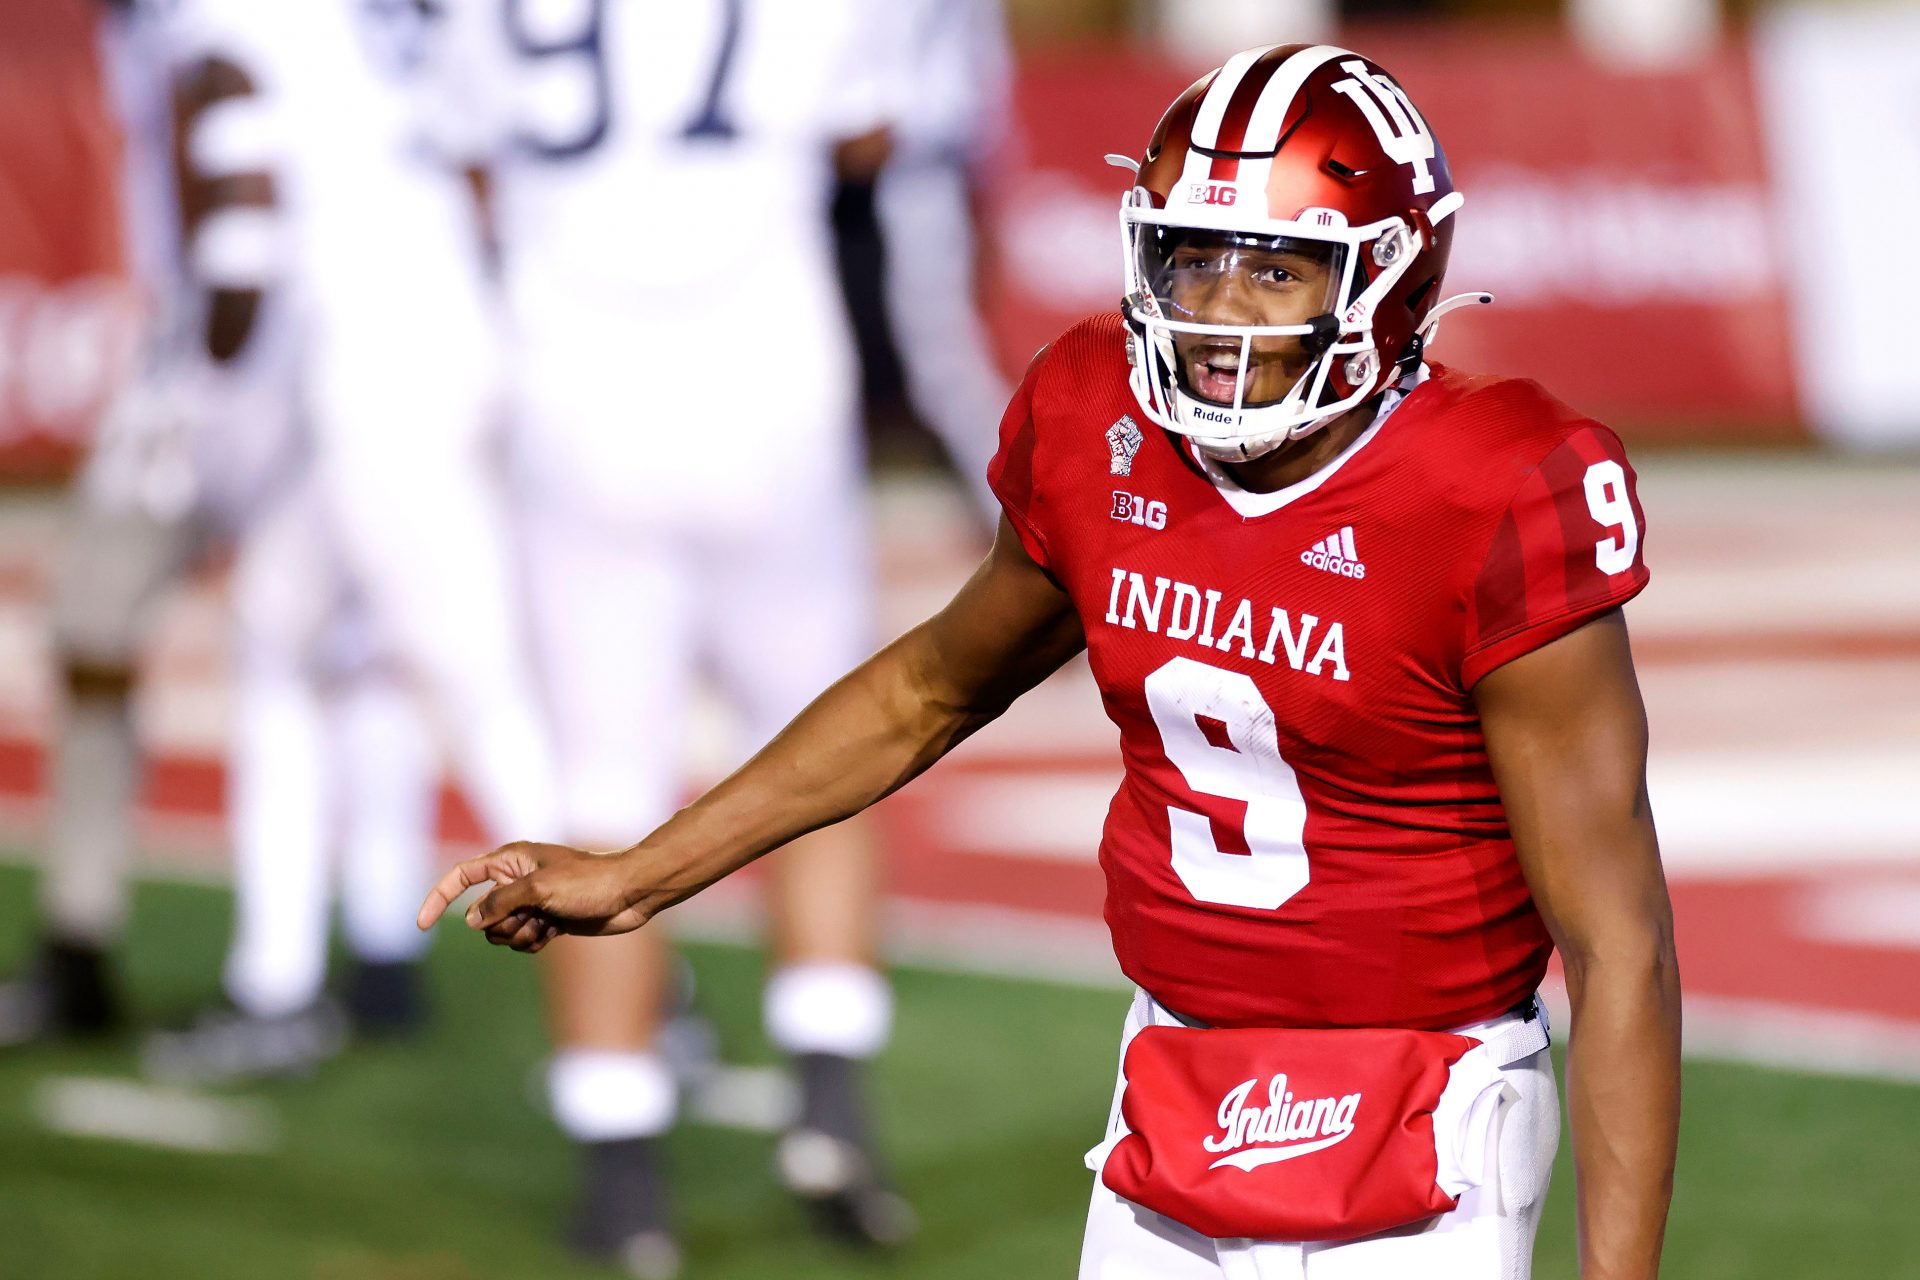 Indiana’s gamble pays off in OT upset over No. 8 Penn Disclose